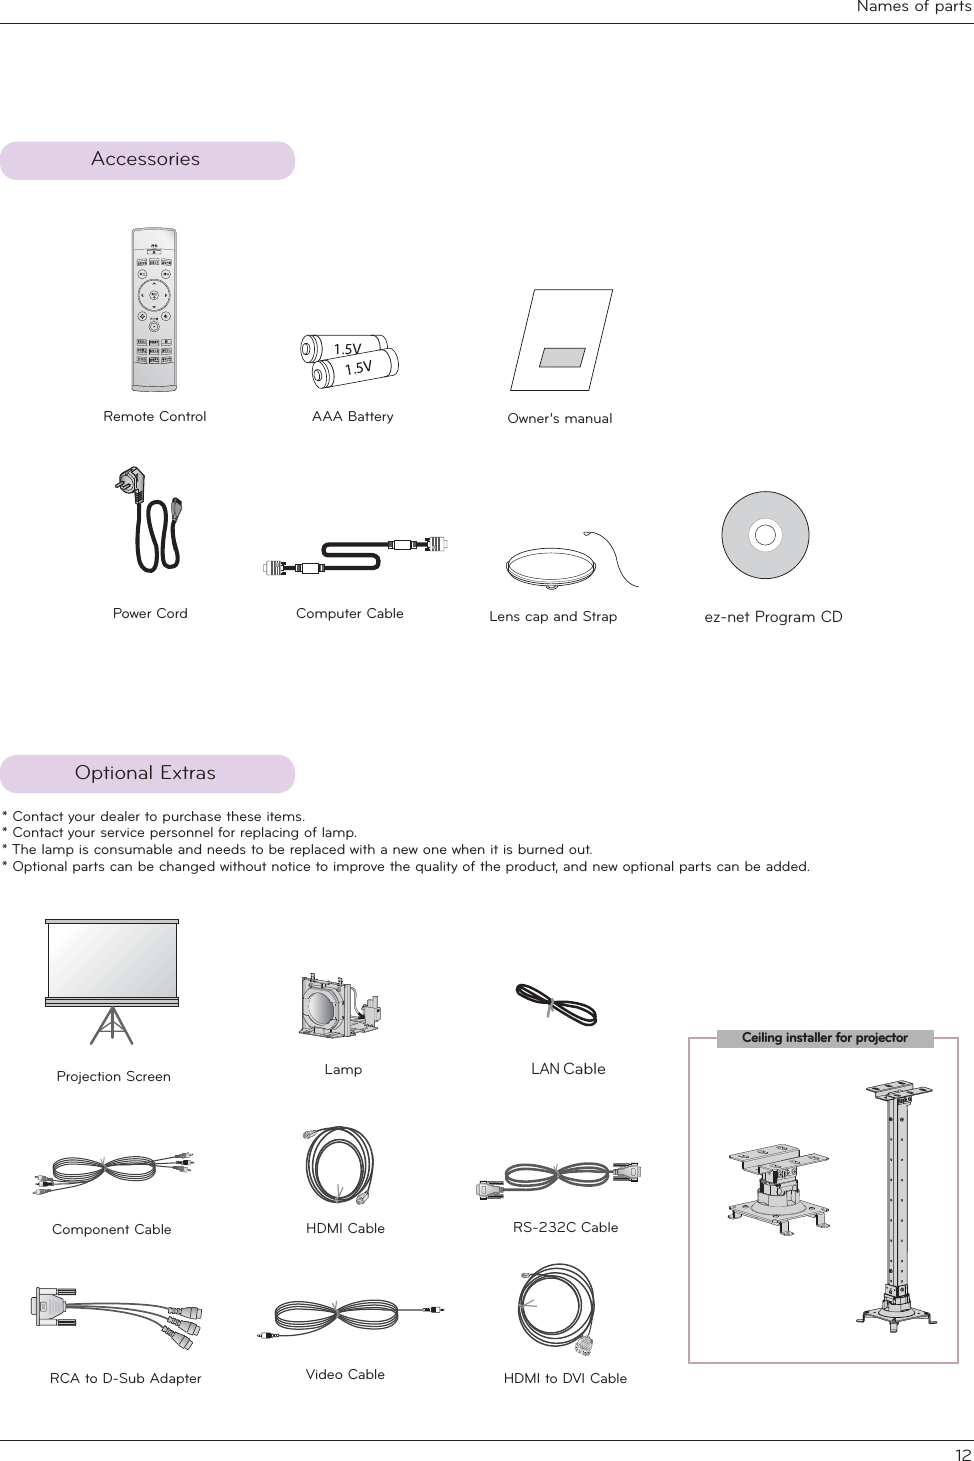 Names of parts12AccessoriesOptional Extras * Contact your dealer to purchase these items.* Contact your service personnel for replacing of lamp.* The lamp is consumable and needs to be replaced with a new one when it is burned out.* Optional parts can be changed without notice to improve the quality of the product, and new optional parts can be added.Remote ControlPower Cord Video Cable HDMI to DVI CableOwner’s manualComputer CableLamp Projection Screen AAA BatteryComponent CableLens cap and StrapRS-232C CableRCA to D-Sub AdapterHDMI Cableez-net Program CDLAN CableCeiling installer for projector